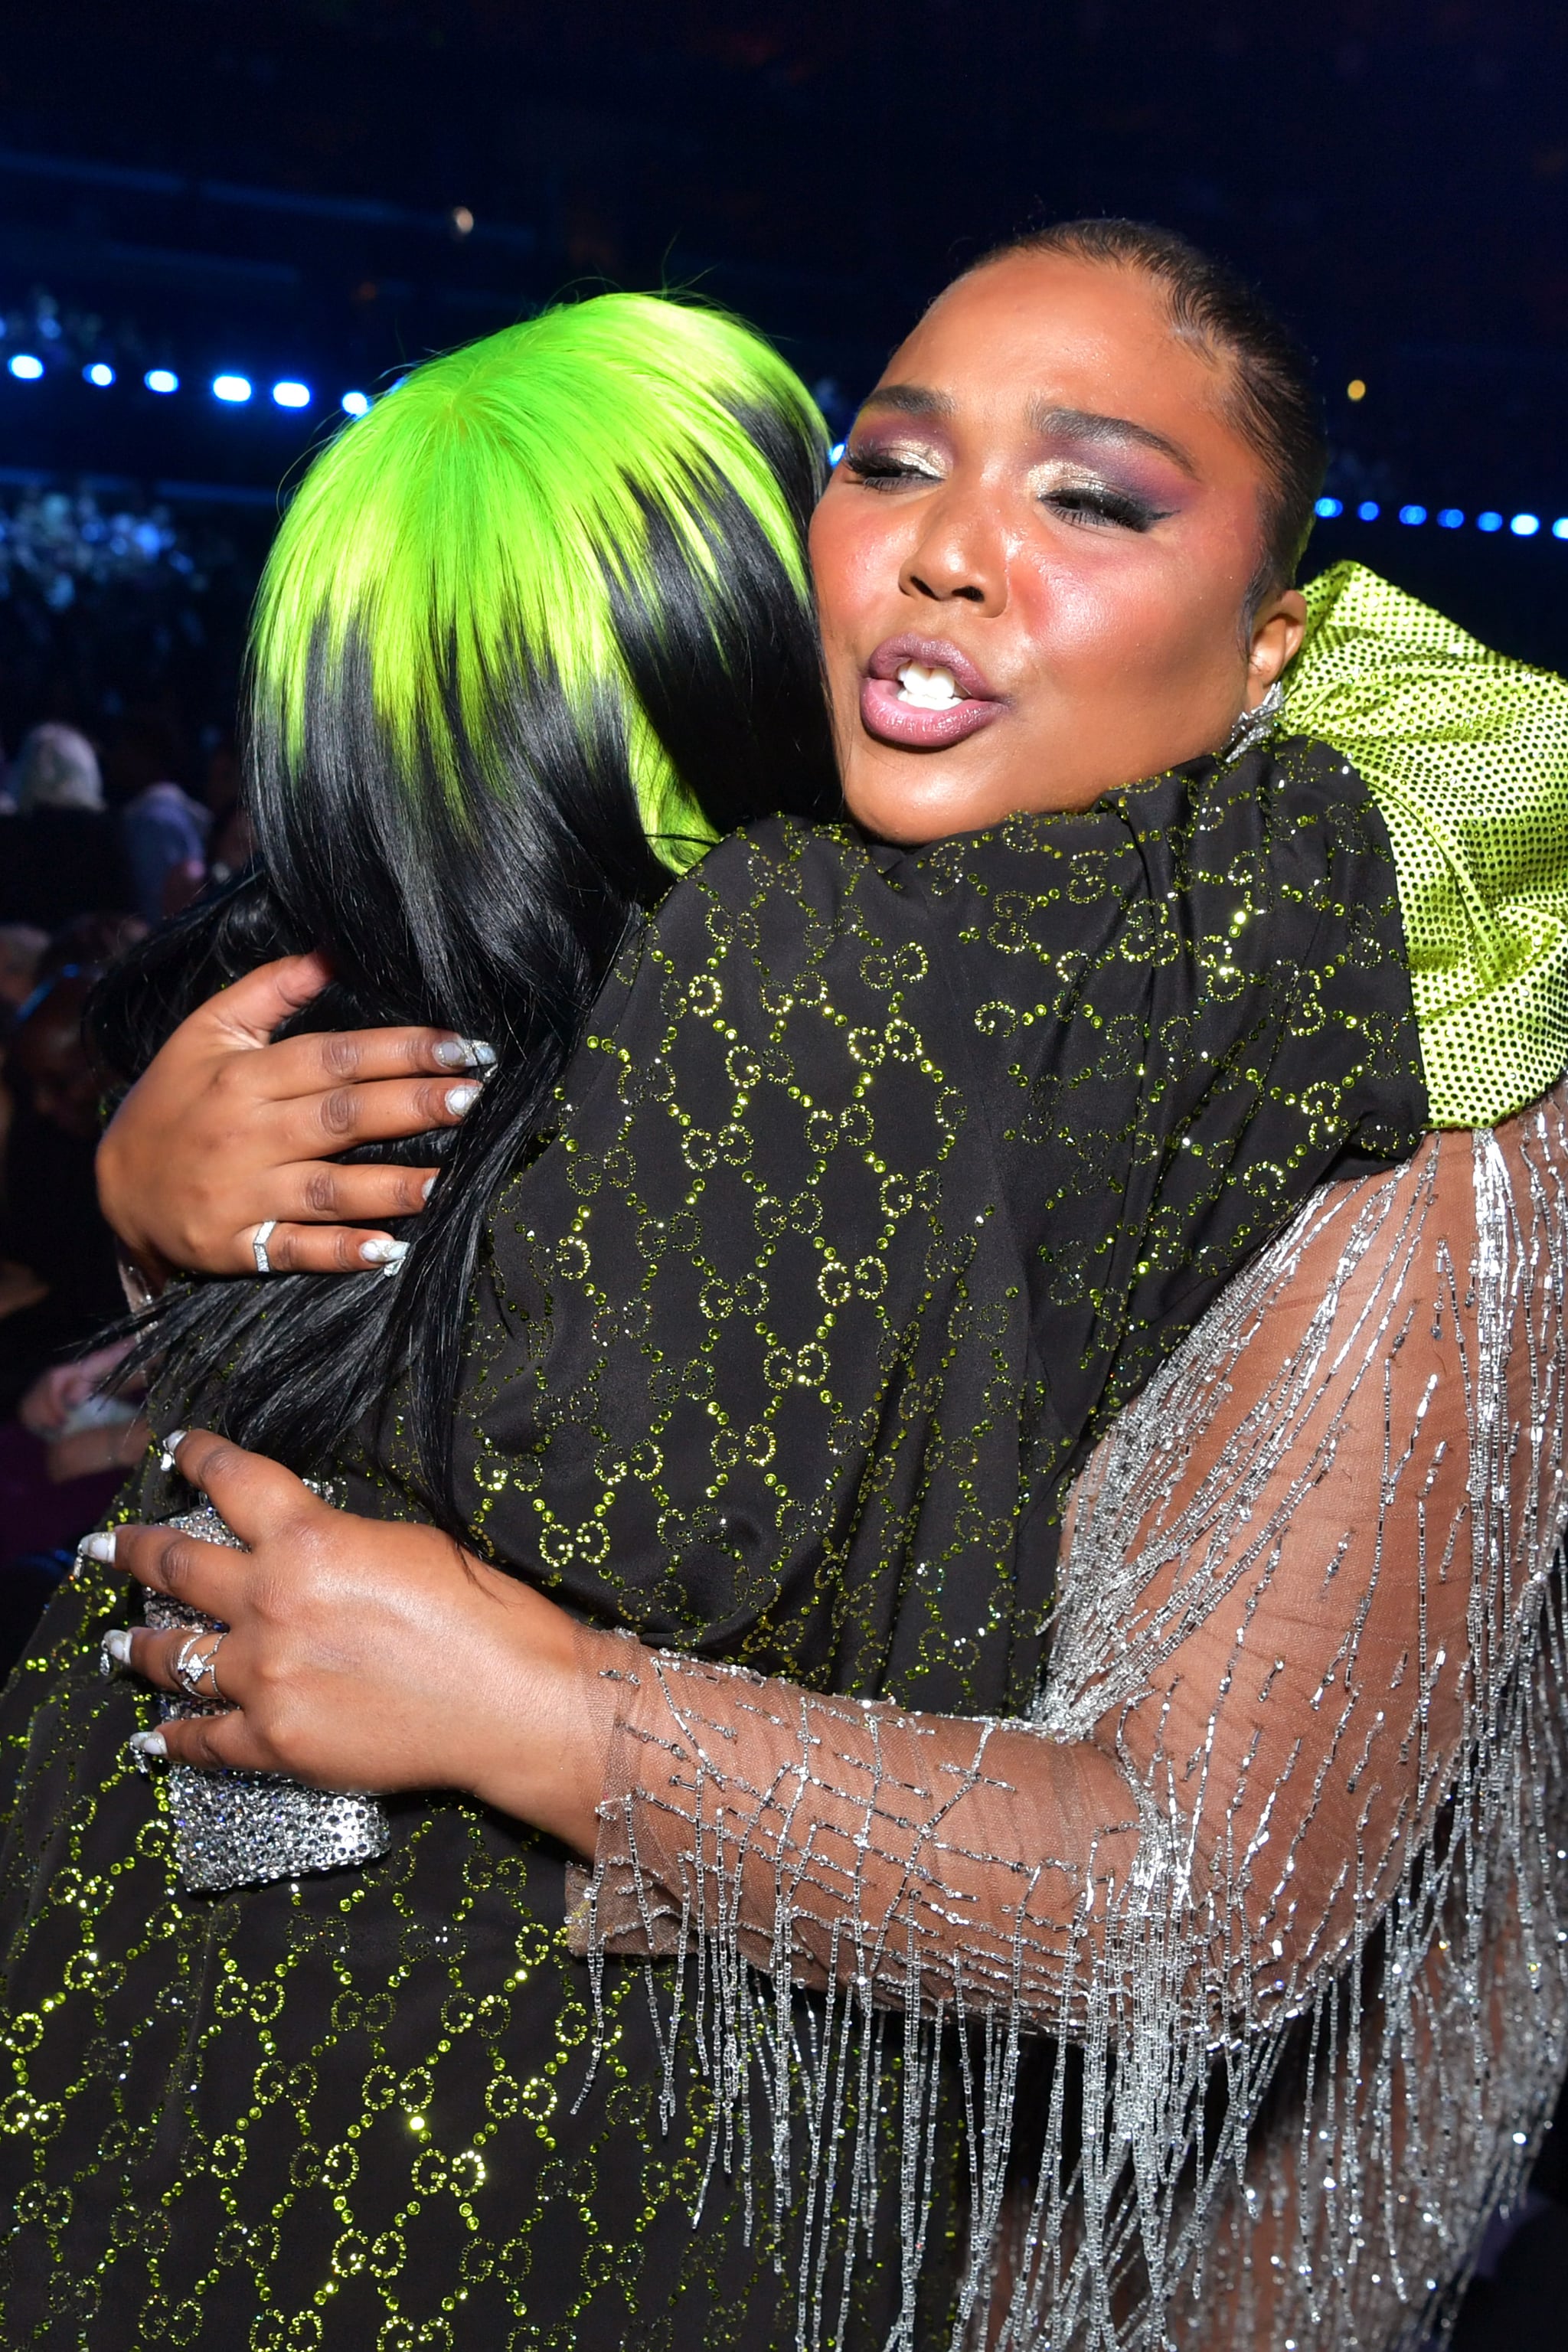 Billie Eilish and Lizzo at the 2020 Grammys | Missed the Grammys? Don't  Worry, These Pictures Sum Up Every Star-Studded Moment | POPSUGAR Celebrity  Photo 9